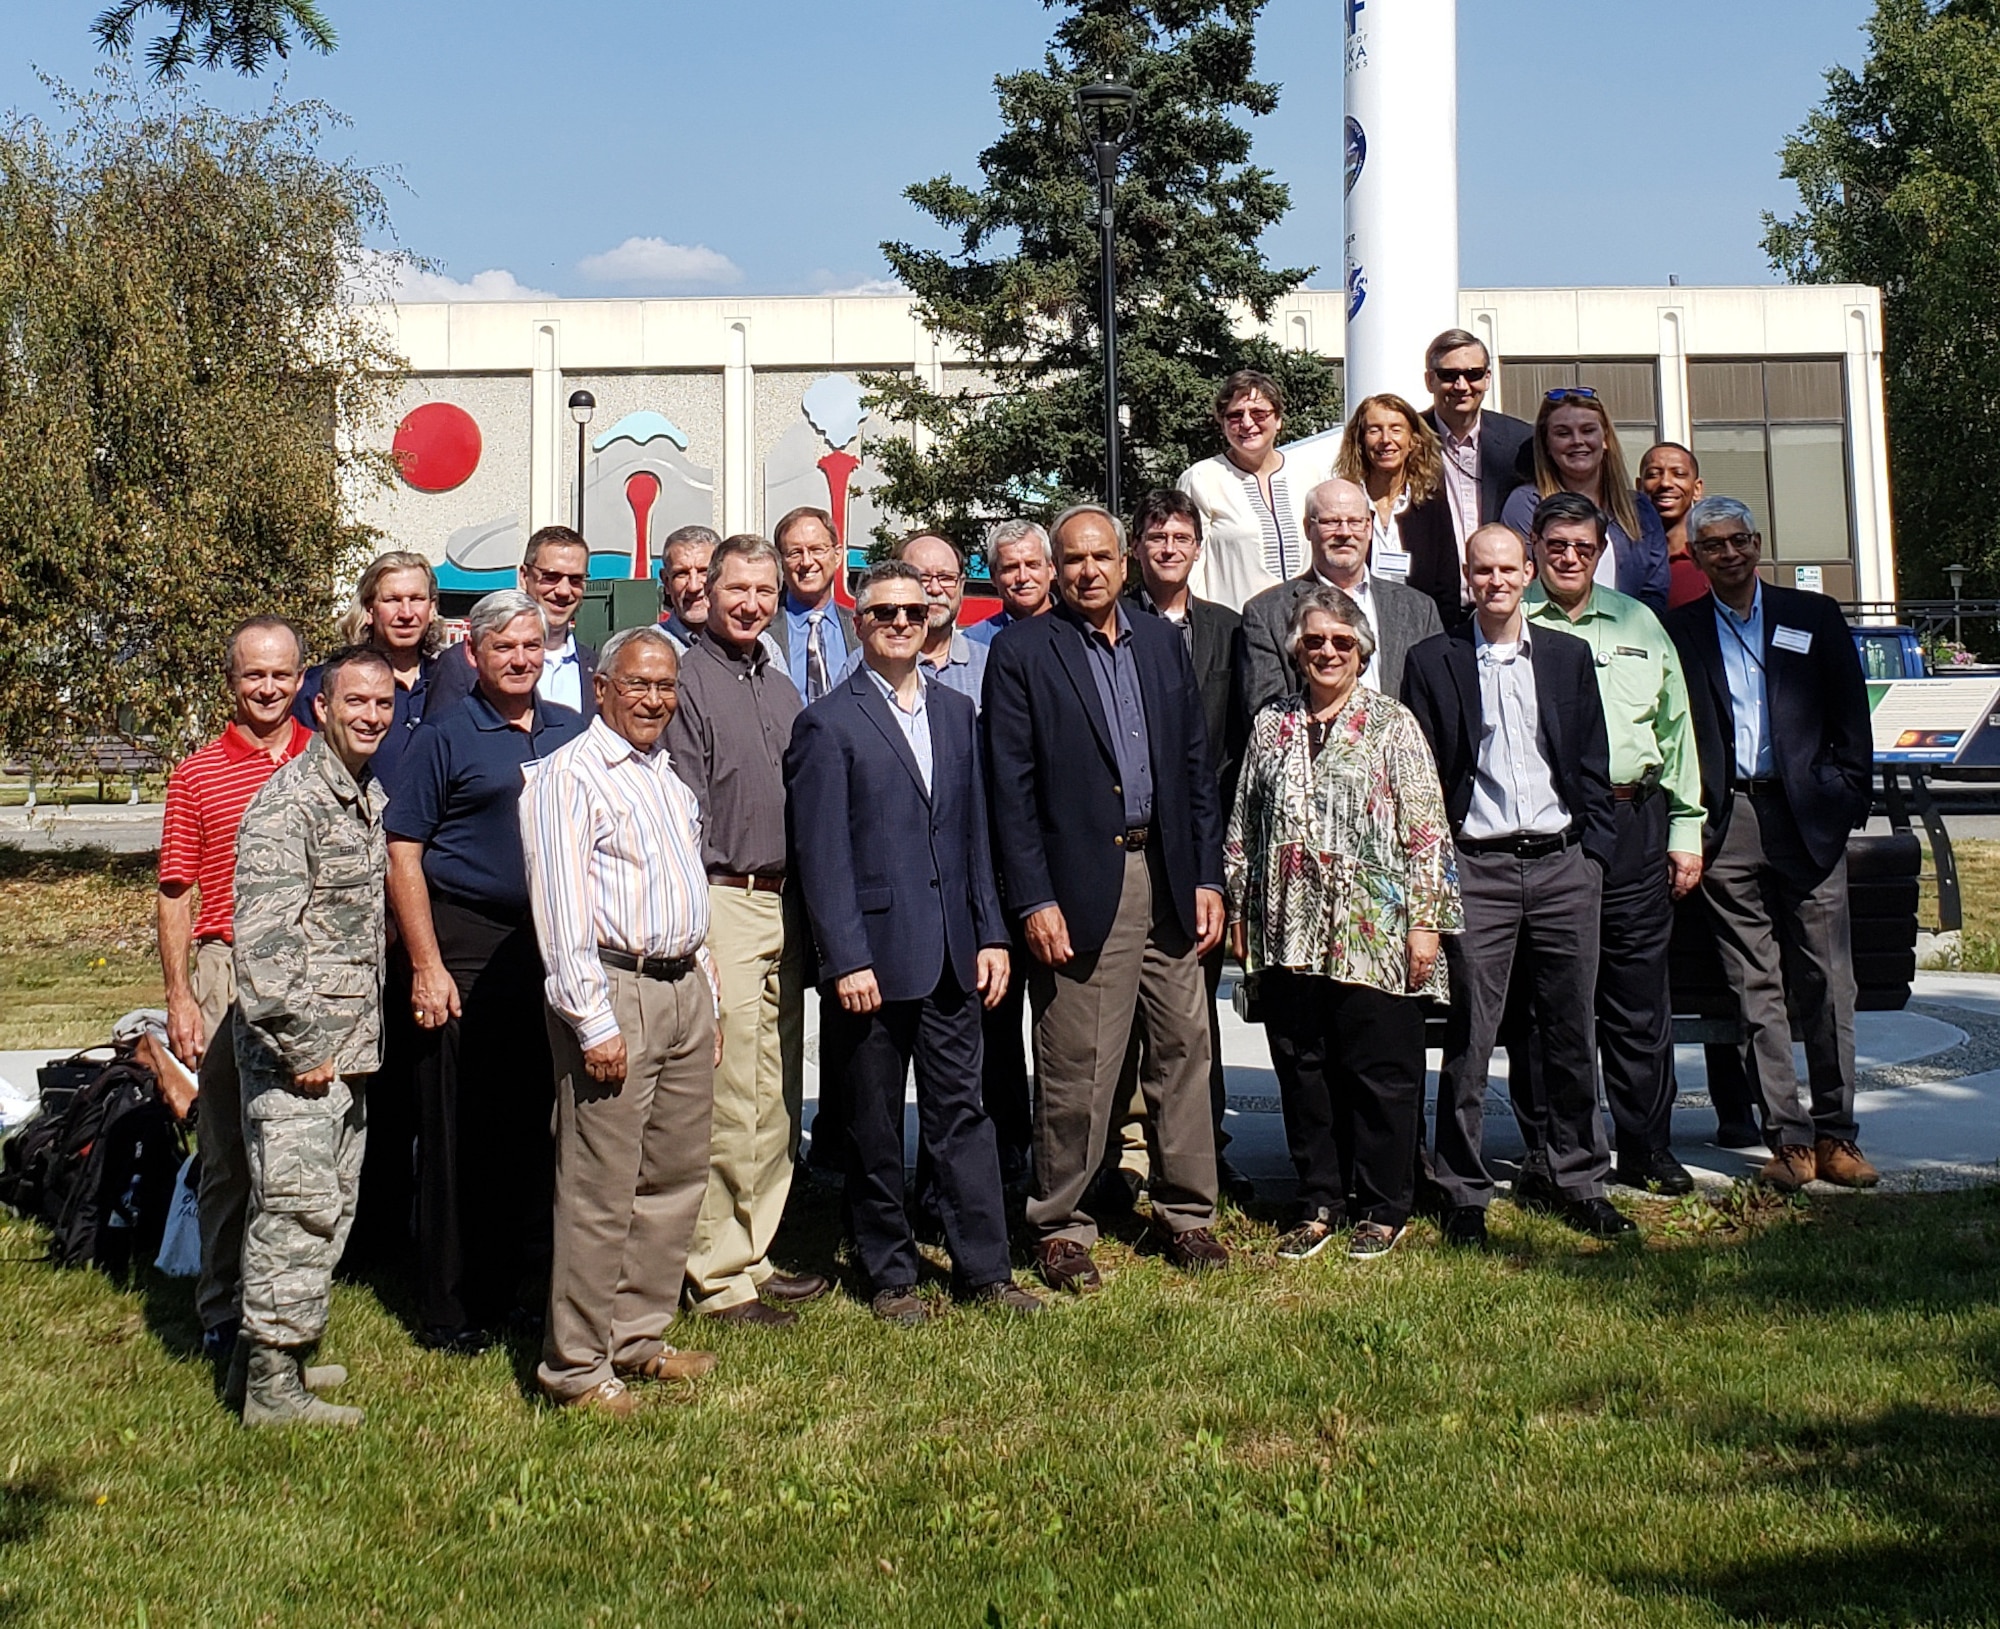 Dr. Richard Joseph, Air Force chief scientist, stands with other Air Force major command chief scientists during a visit to University of Alaska-Fairbanks Geophysical Institute, July 22, 2019. The group visited scientific facilities and military installations across Alaska during a week-long visit highlighting the strategic importance of the nation's largest, northernmost state.  (U.S. Air Force photo by Lt. Col. Peter Shinn)